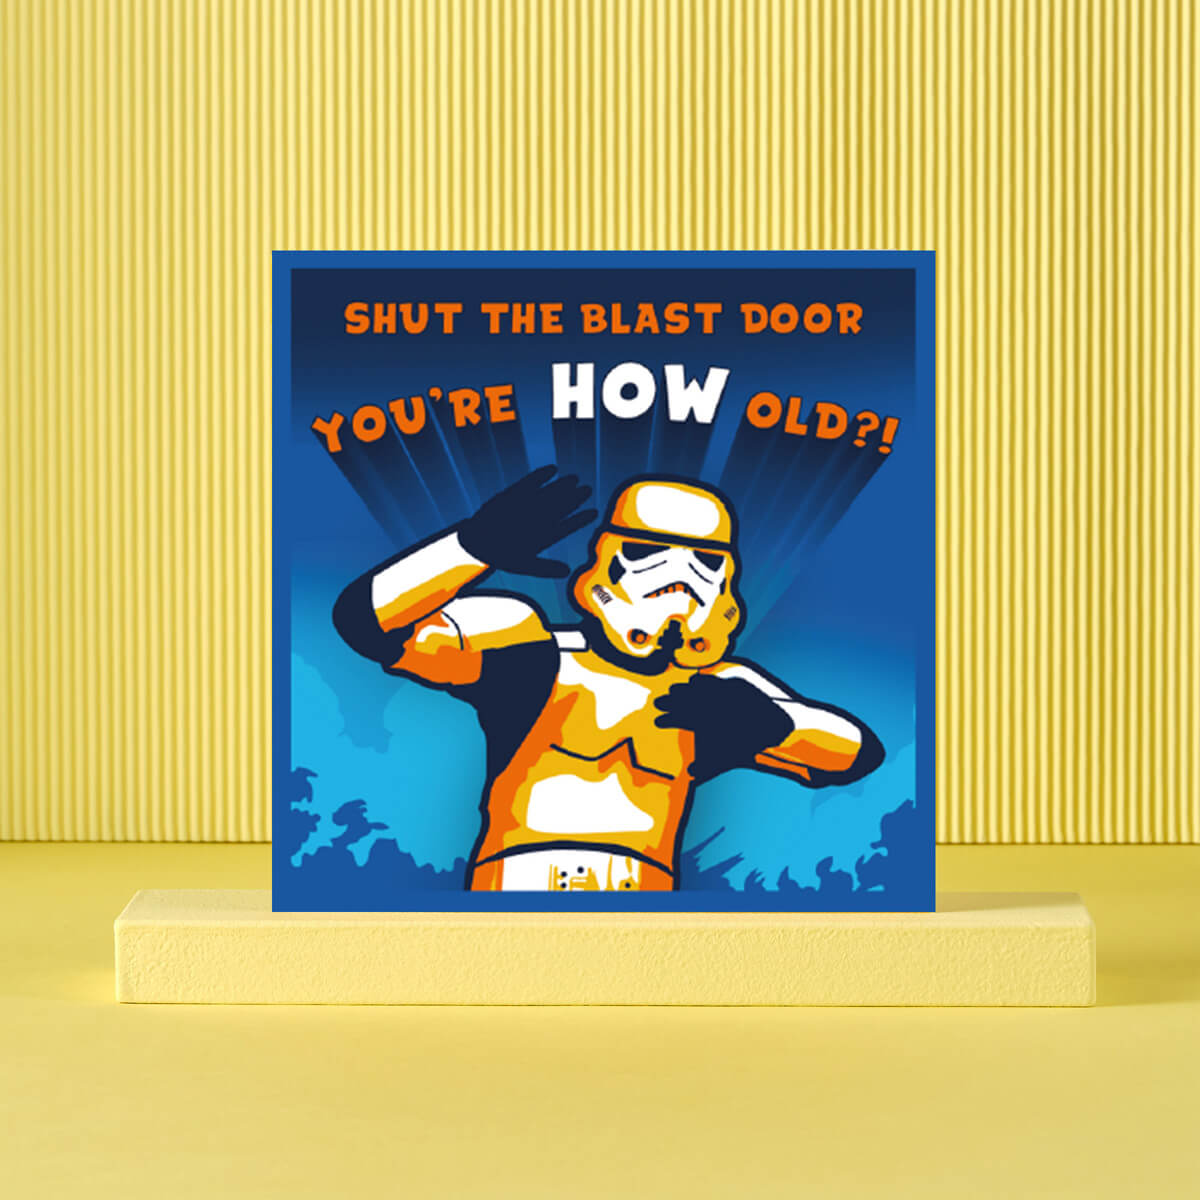 Original Stormtrooper funny birthday card for him - card reads 'Shut The Blast Door, You're HOW old?'